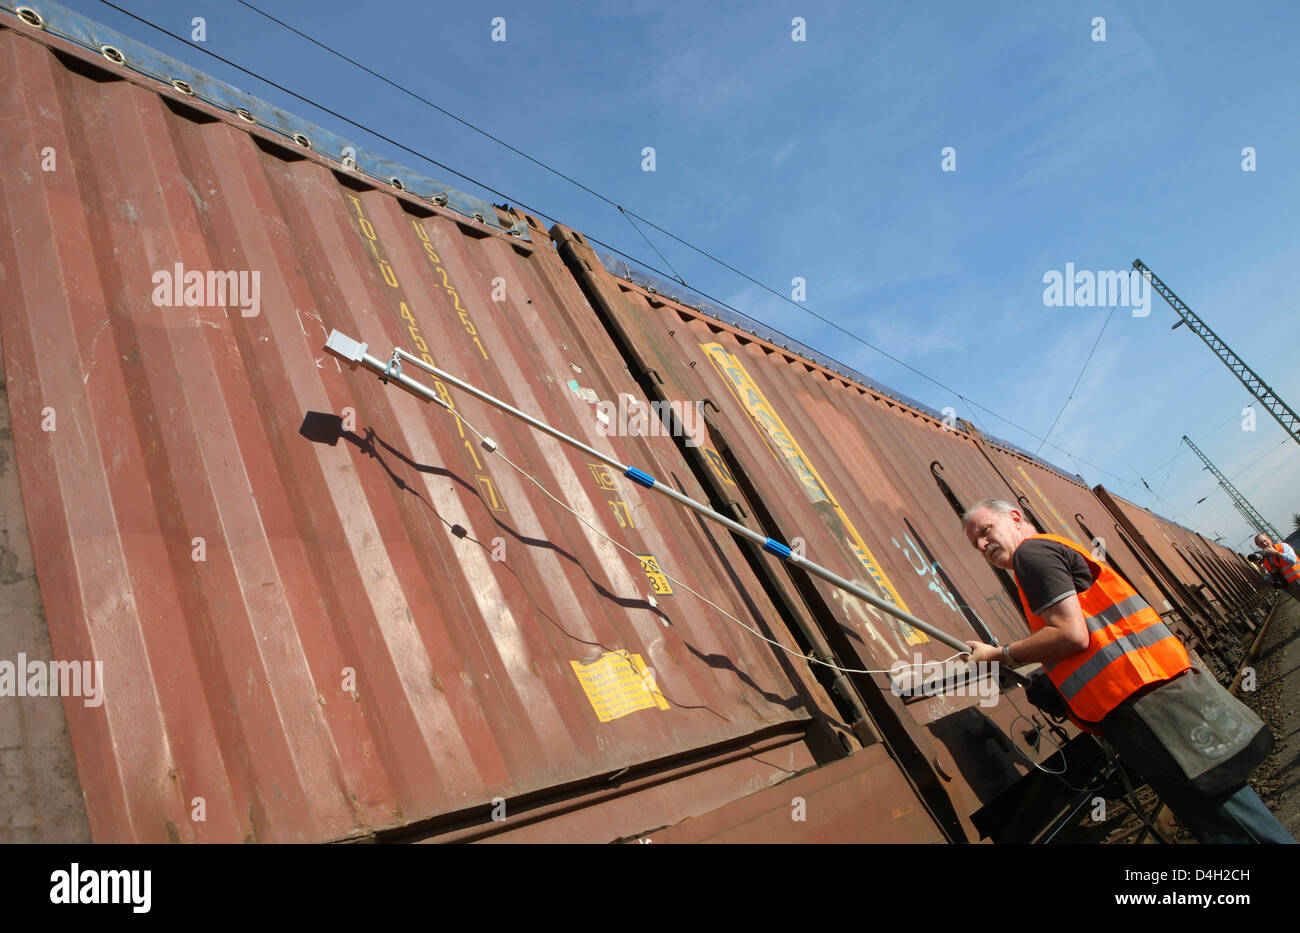 Worker Joerg Bolitz checks possible radioactivity in front of a  rail carriage filled with waste from Naples/Italy in Cologne, Germany, 1 August 2008. Alltogether 160 000 tons of household waste from the Naples region will be delivered to German waste incinerating plants. The first carriages have arrived in Cologne. They will be transfered to Leverkusen by midday. Photo: Rolf Venne Stock Photo